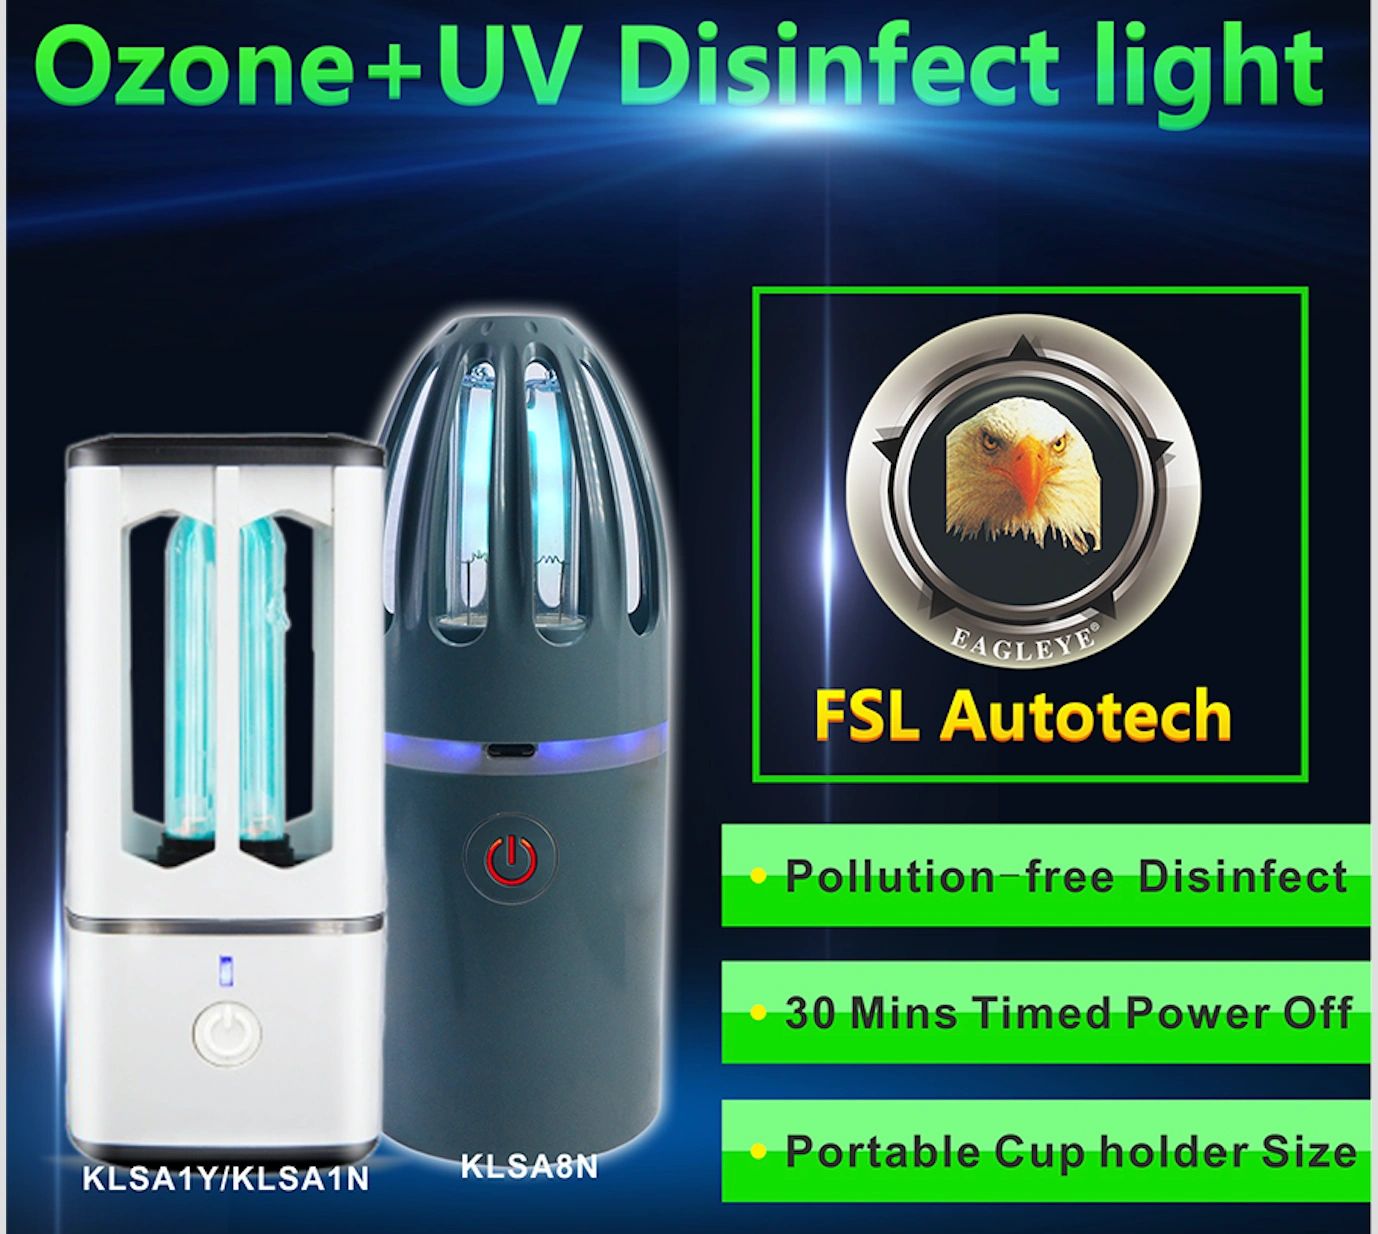 FSL Autotech UV + Ozone Disinfect Light portable rechargeable for vehicles, cars, trucks, bus, taxis